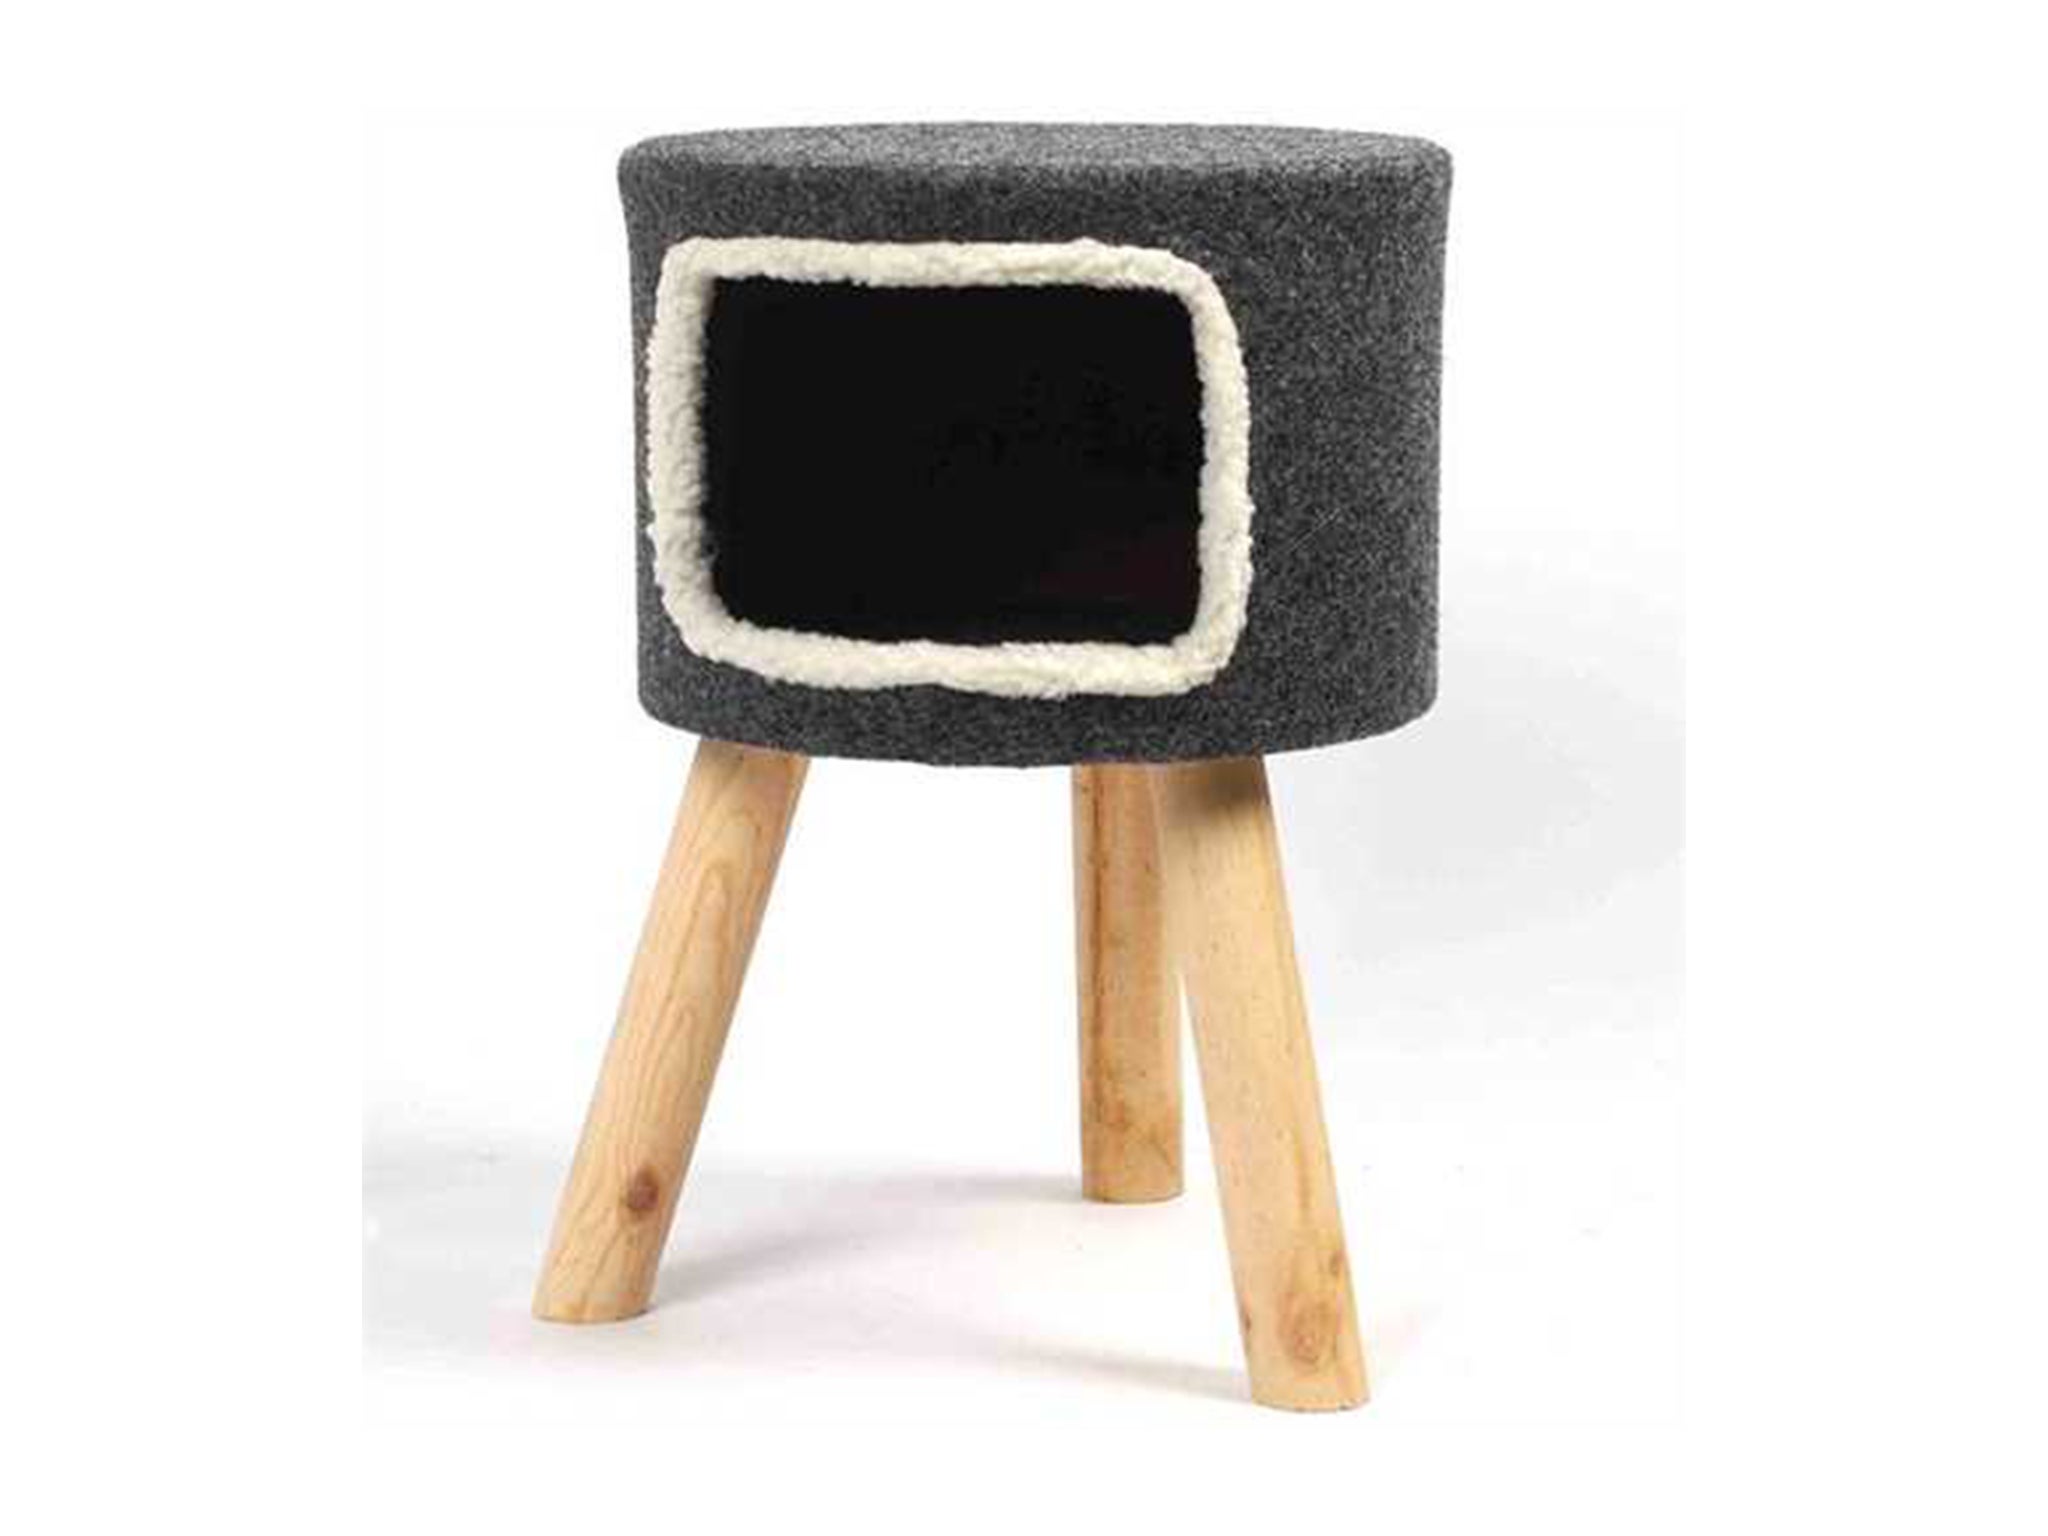 Minimise the cat hair on your carpet with this bed that's held on wooden legs